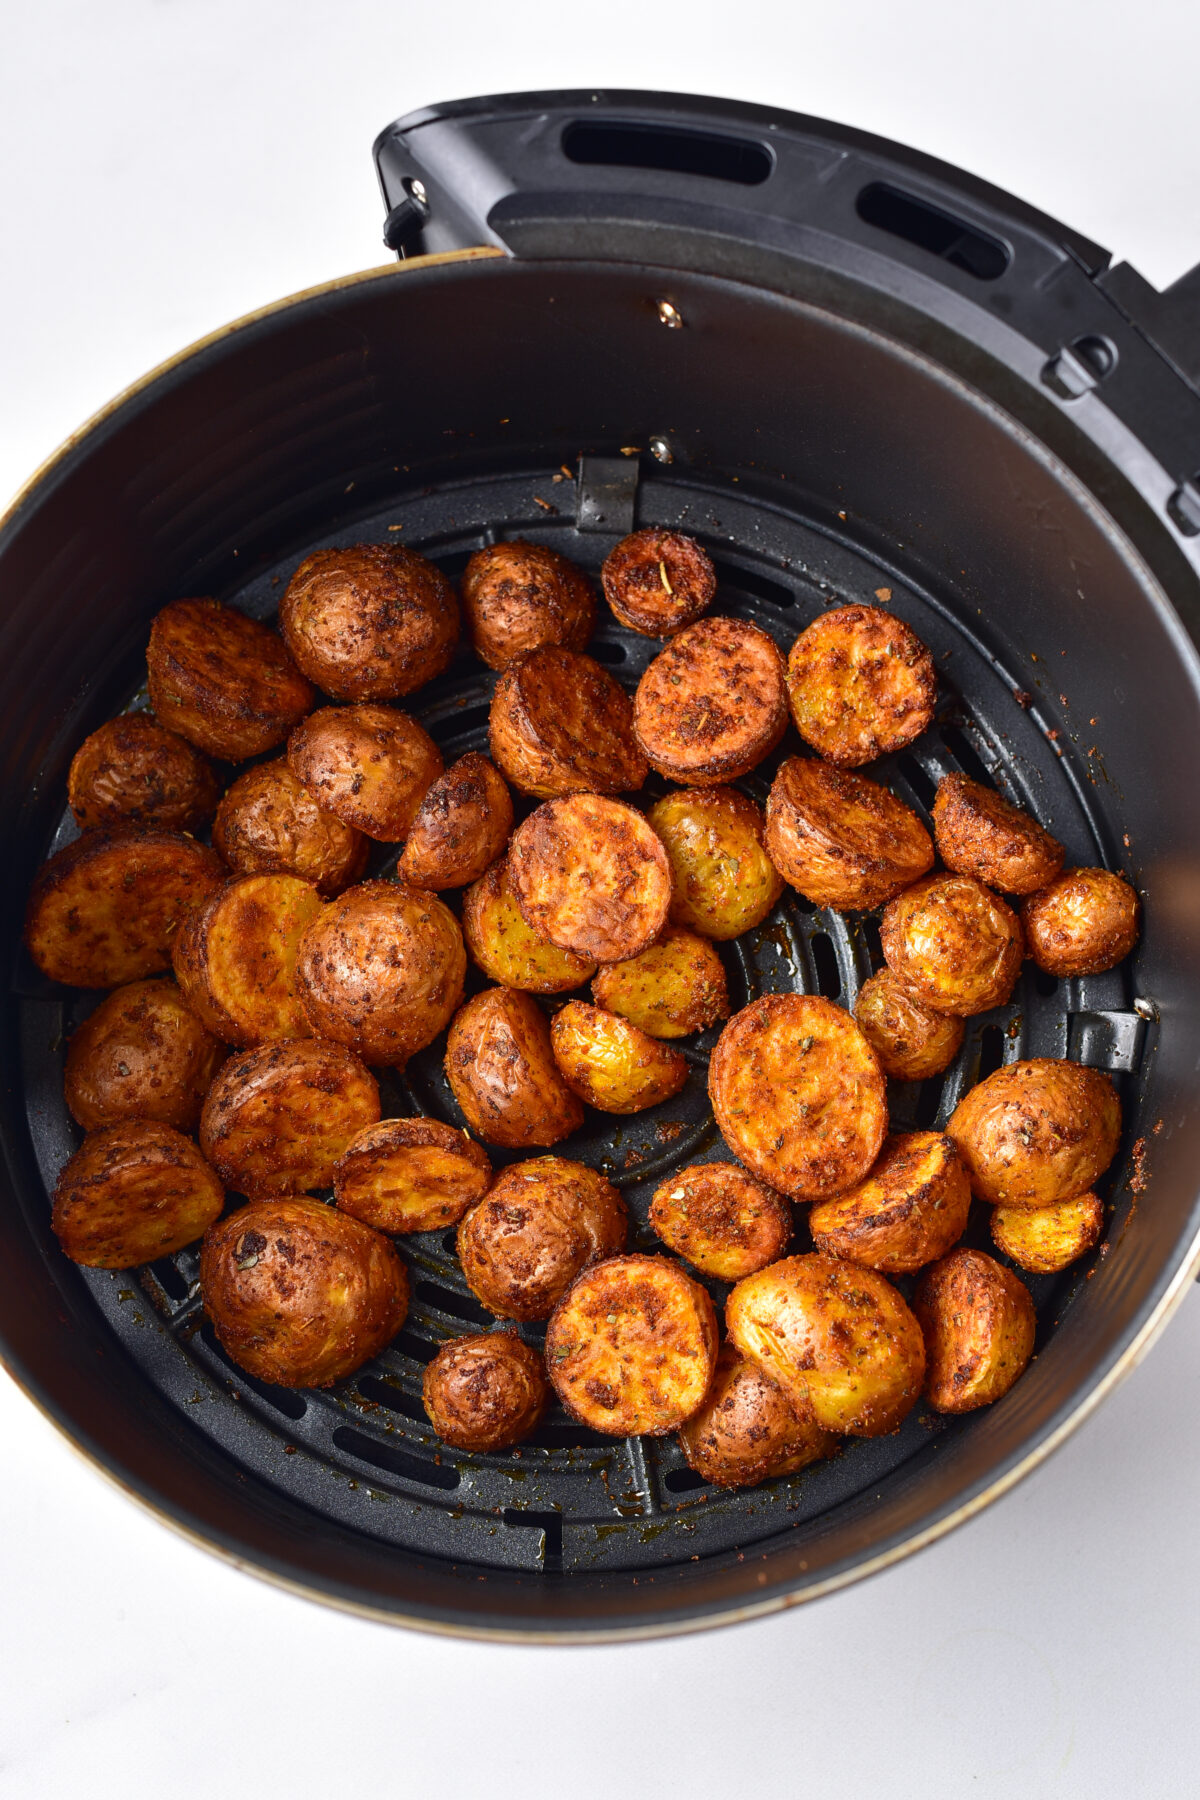 Baby potatoes done roasting in the air fryer.